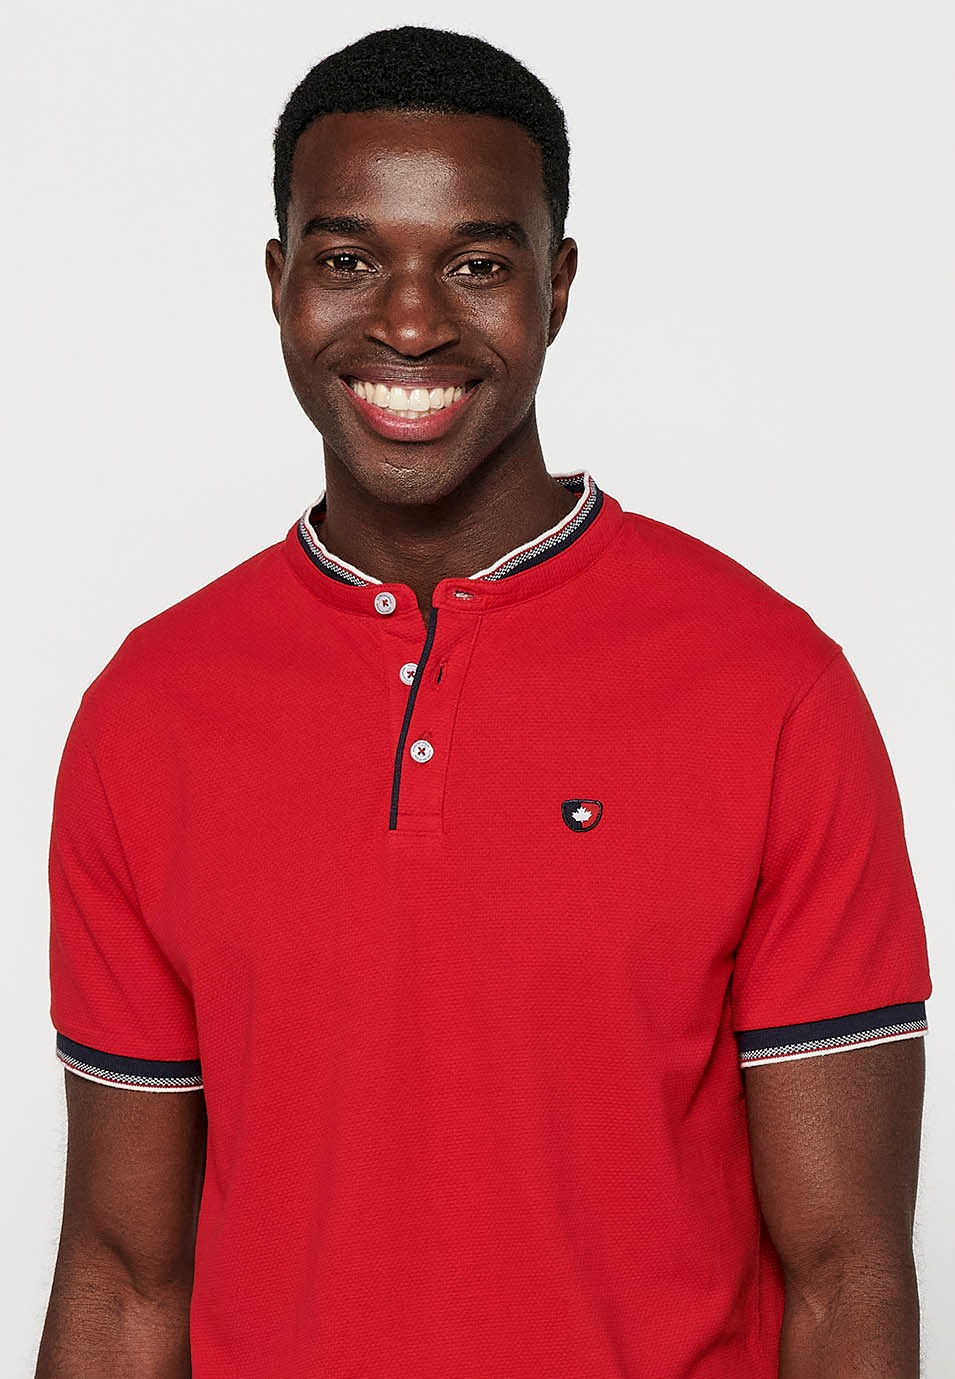 Short-sleeved cotton polo shirt finished in rib with a round neck with buttoned opening and textured with side slits in Red for Men 4